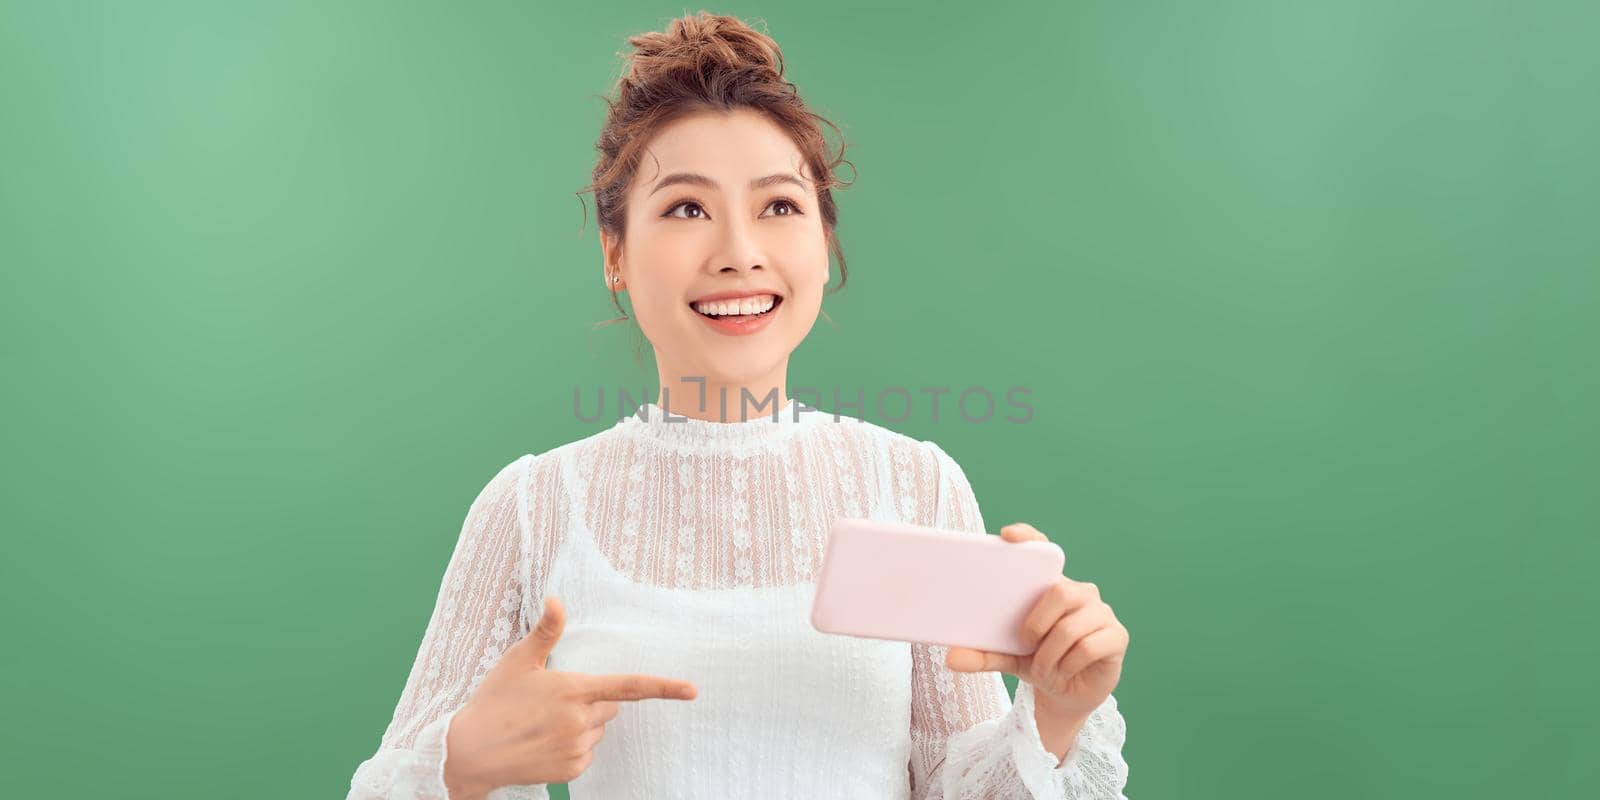 Portrait of a smiling casual woman holding smartphone over green background.